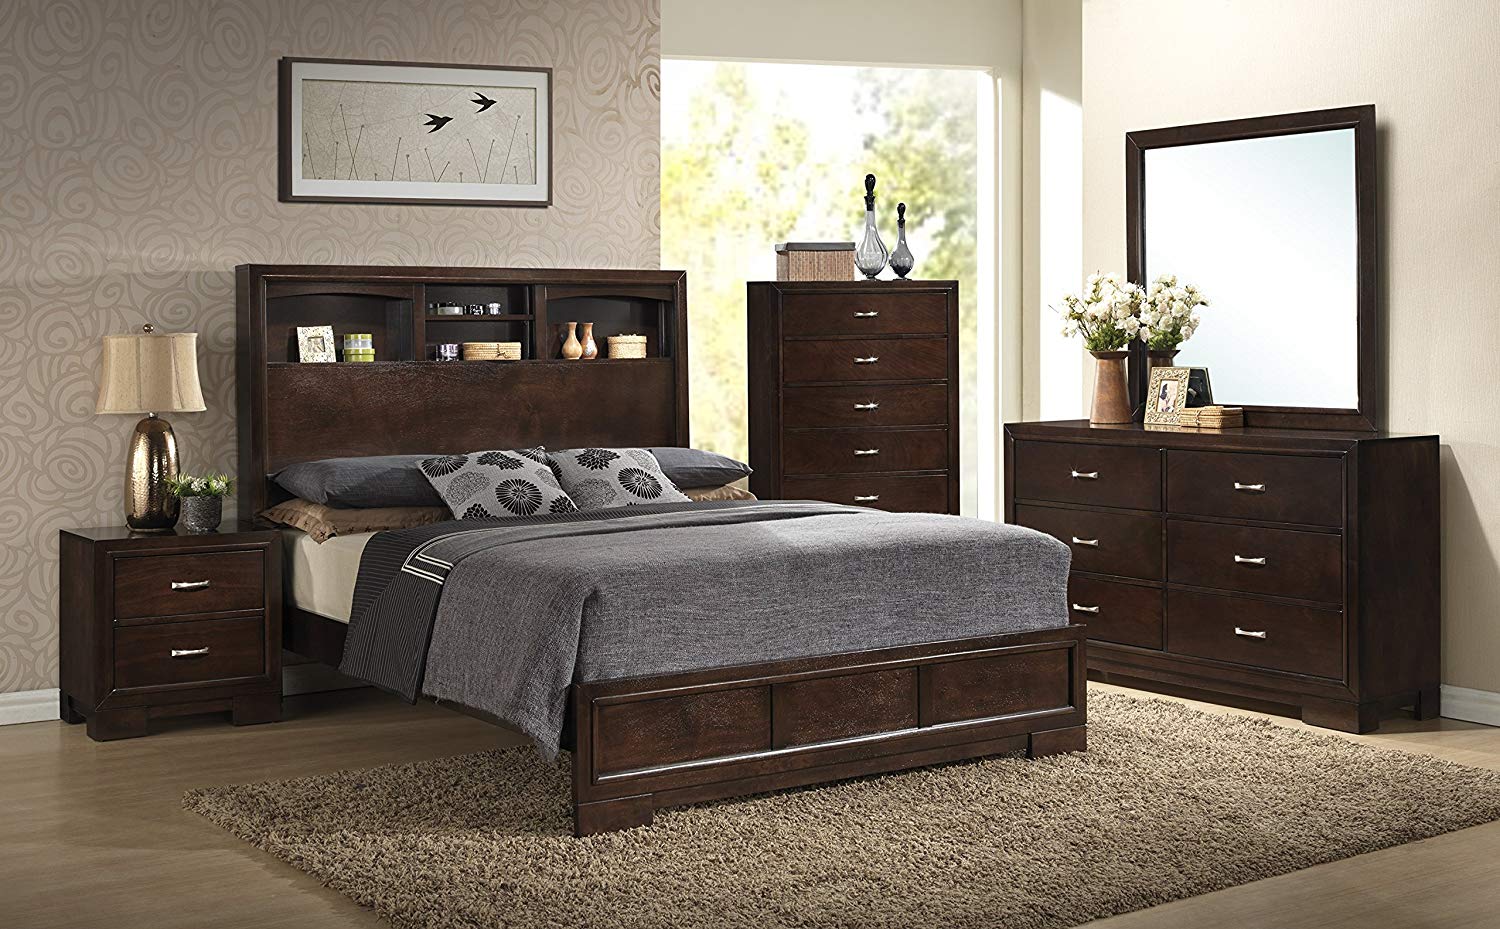 cape may bedroom furniture